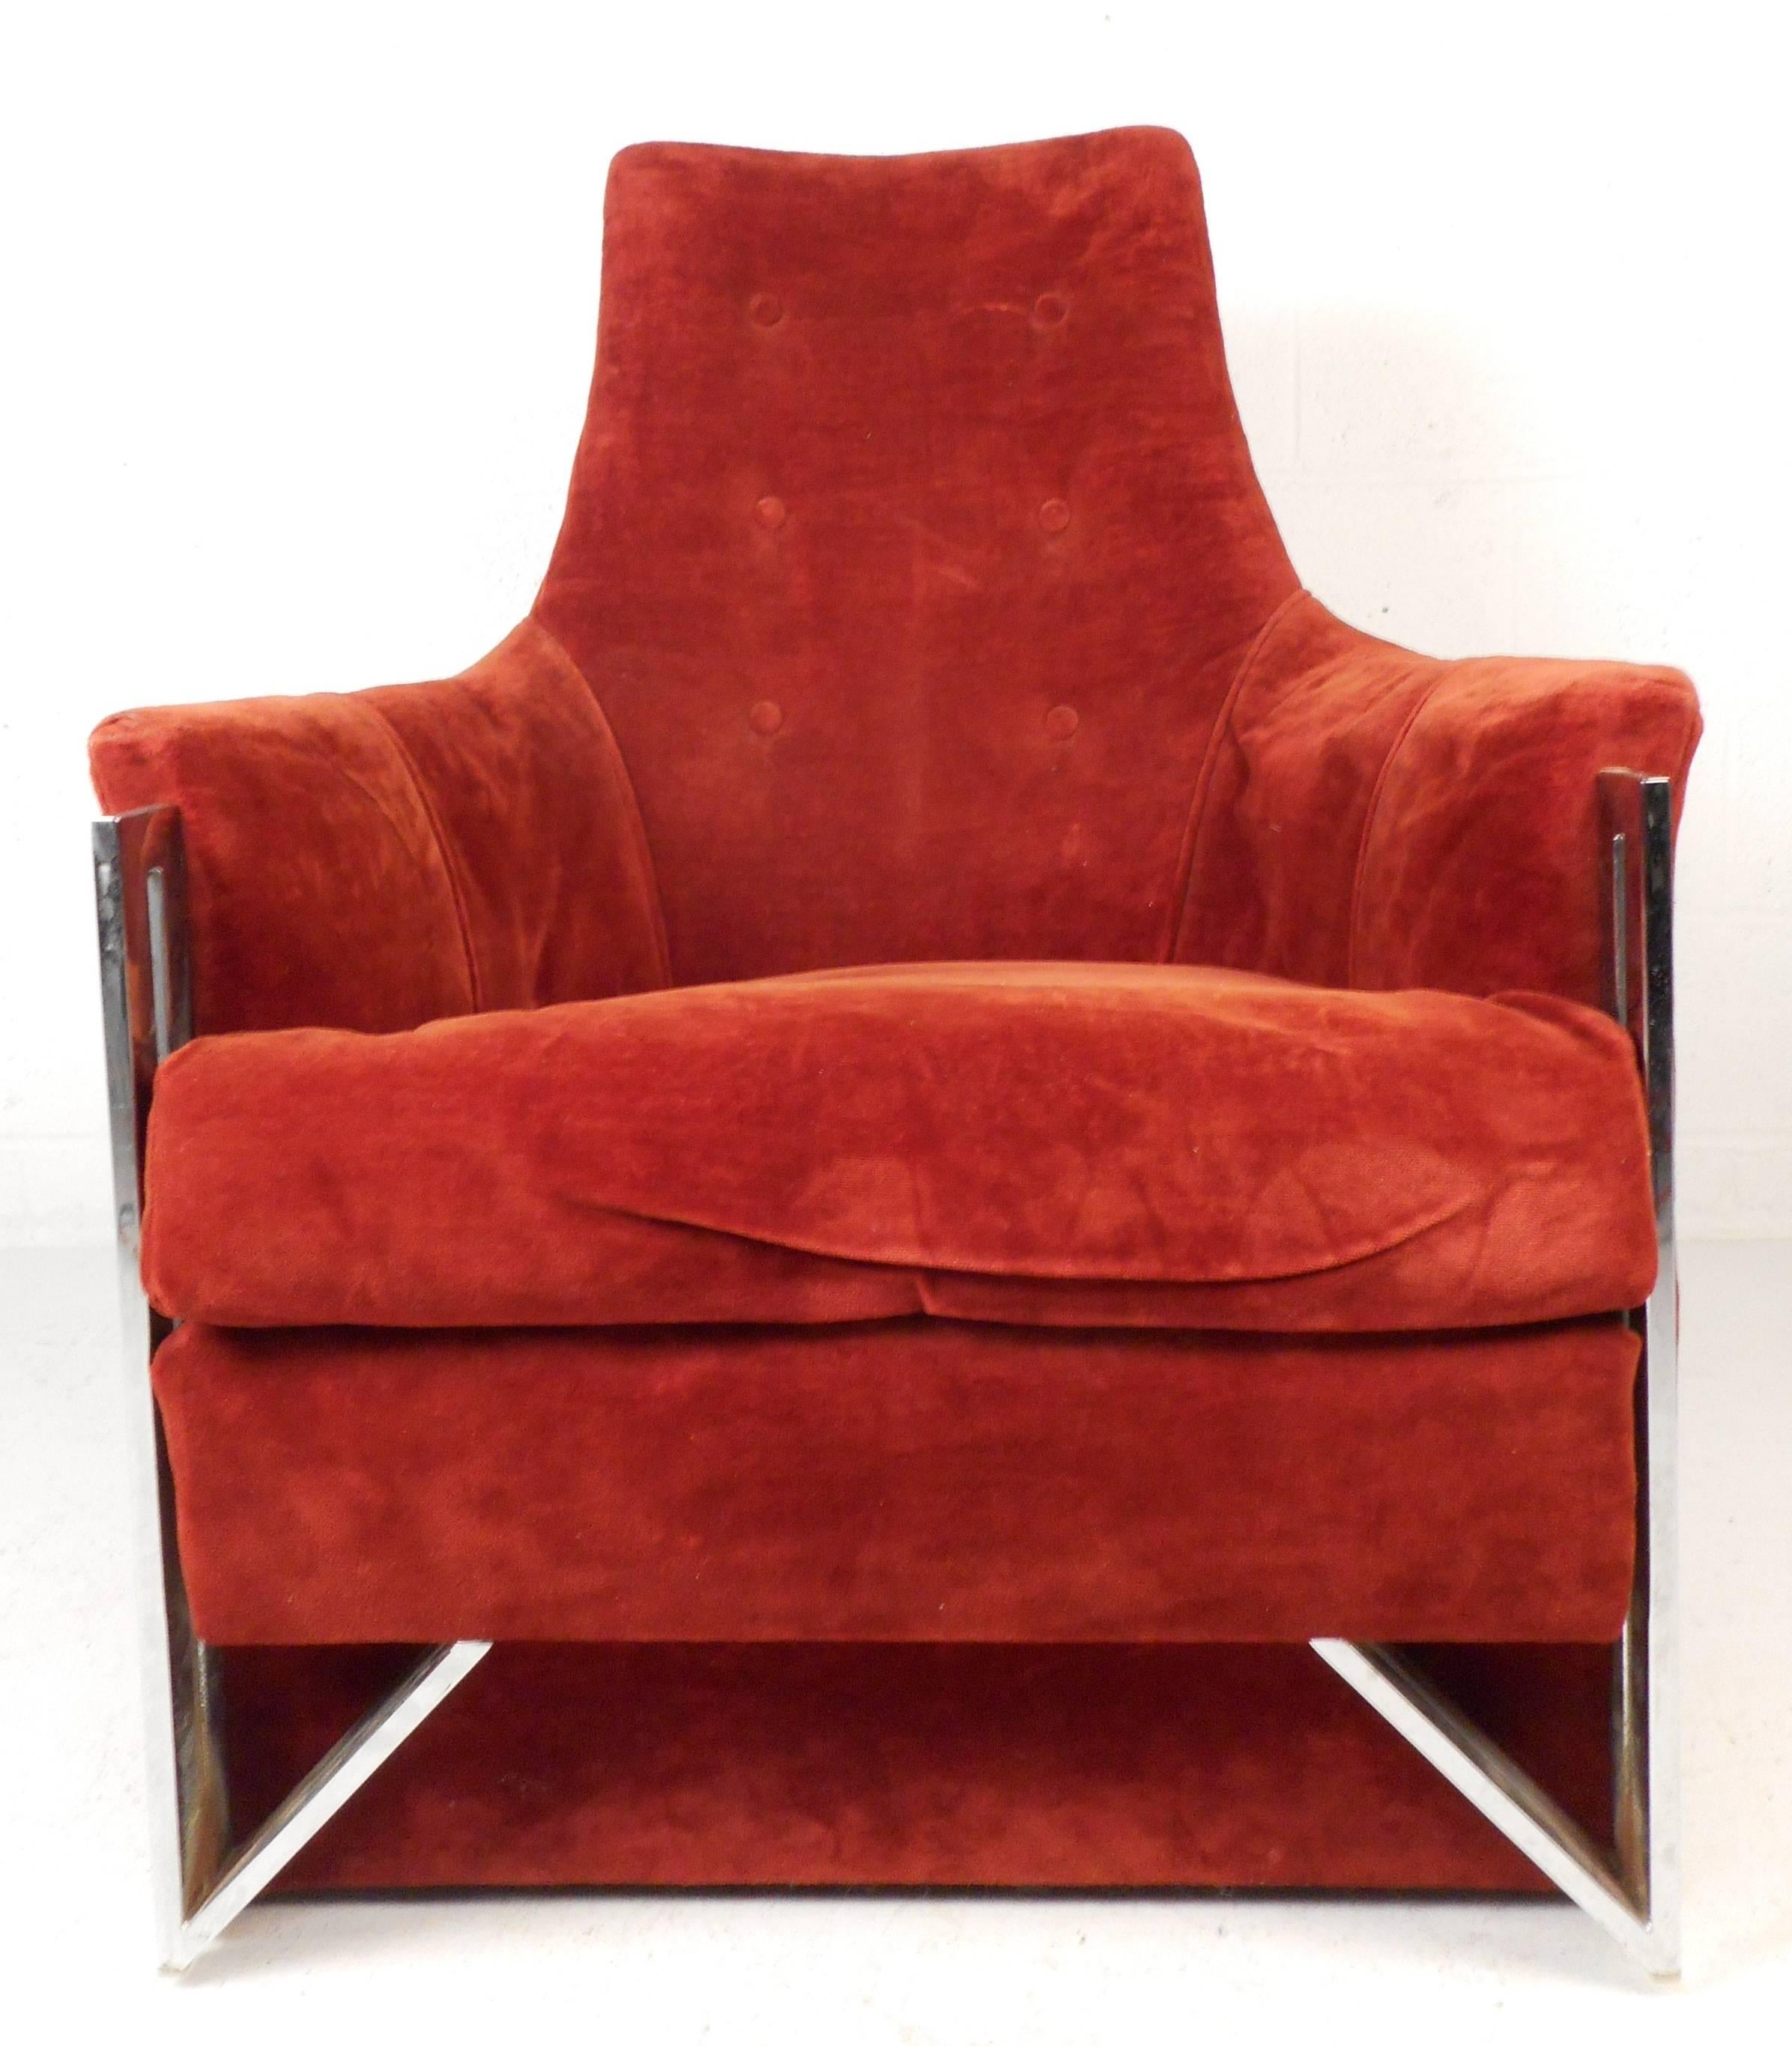 Impressive vintage modern lounge chair with a heavy sculpted chrome frame and a tufted backrest. Unique design features plush velvet upholstery, a very thick removable cushion, and large wraparound arm rests. This incredibly comfortable chair makes